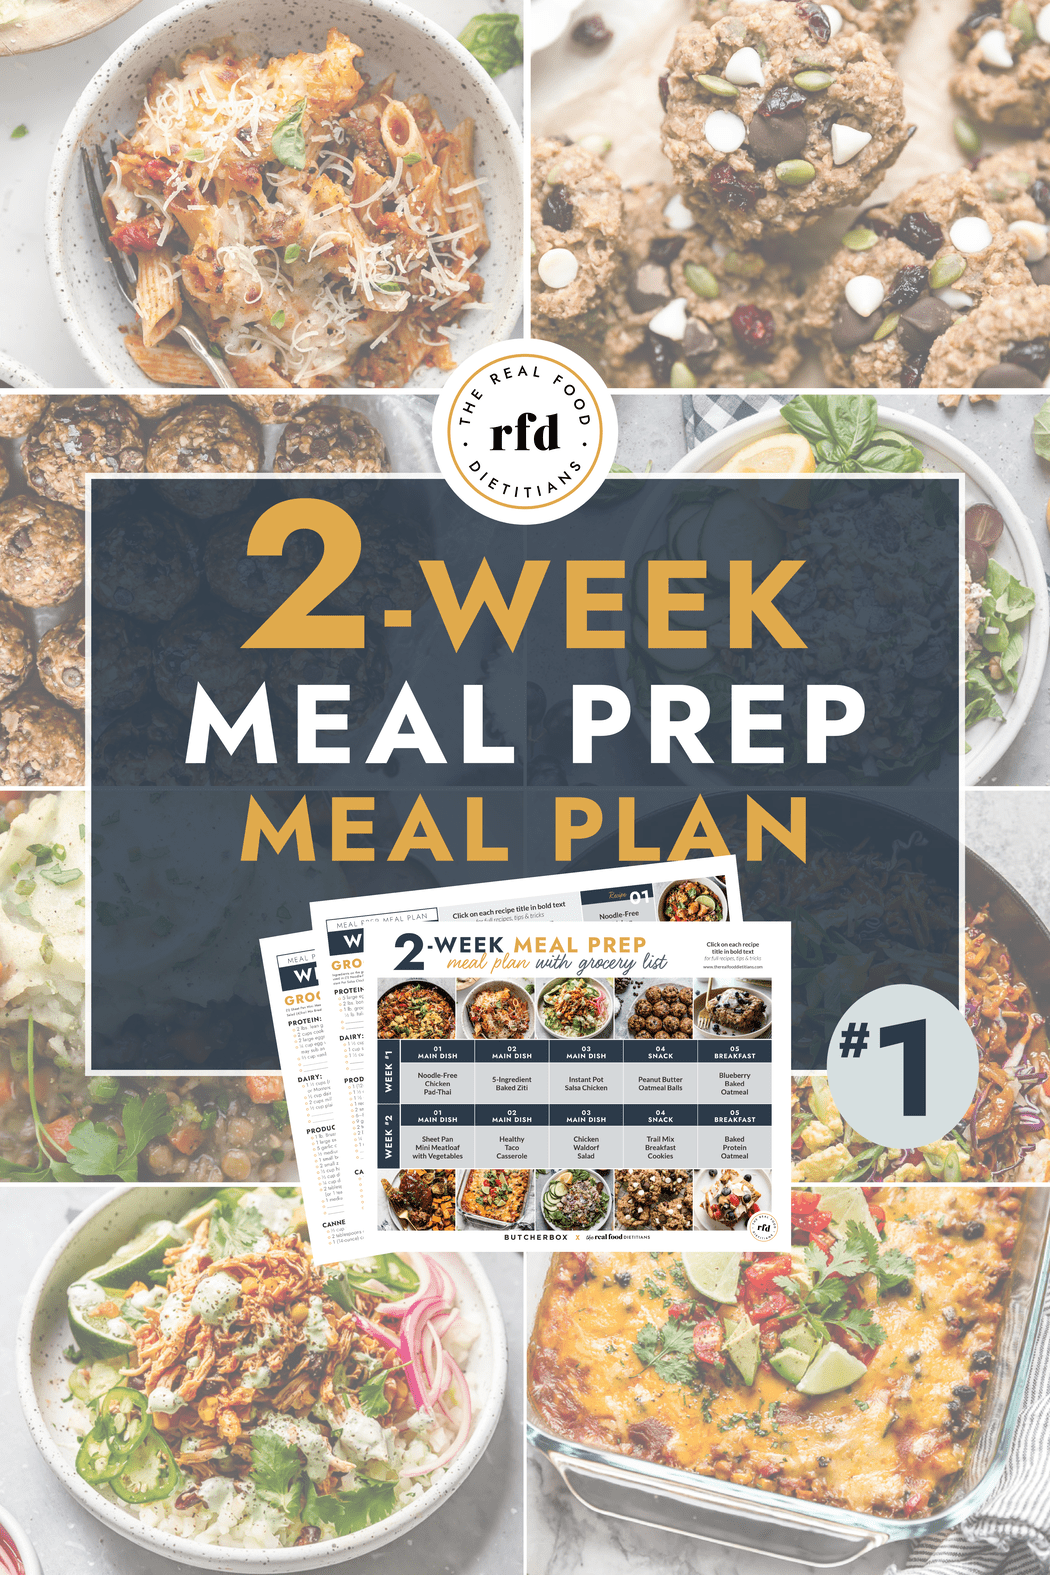 2-Week Meal Prep Meal Plan with Grocery Record - BestAiLife.com